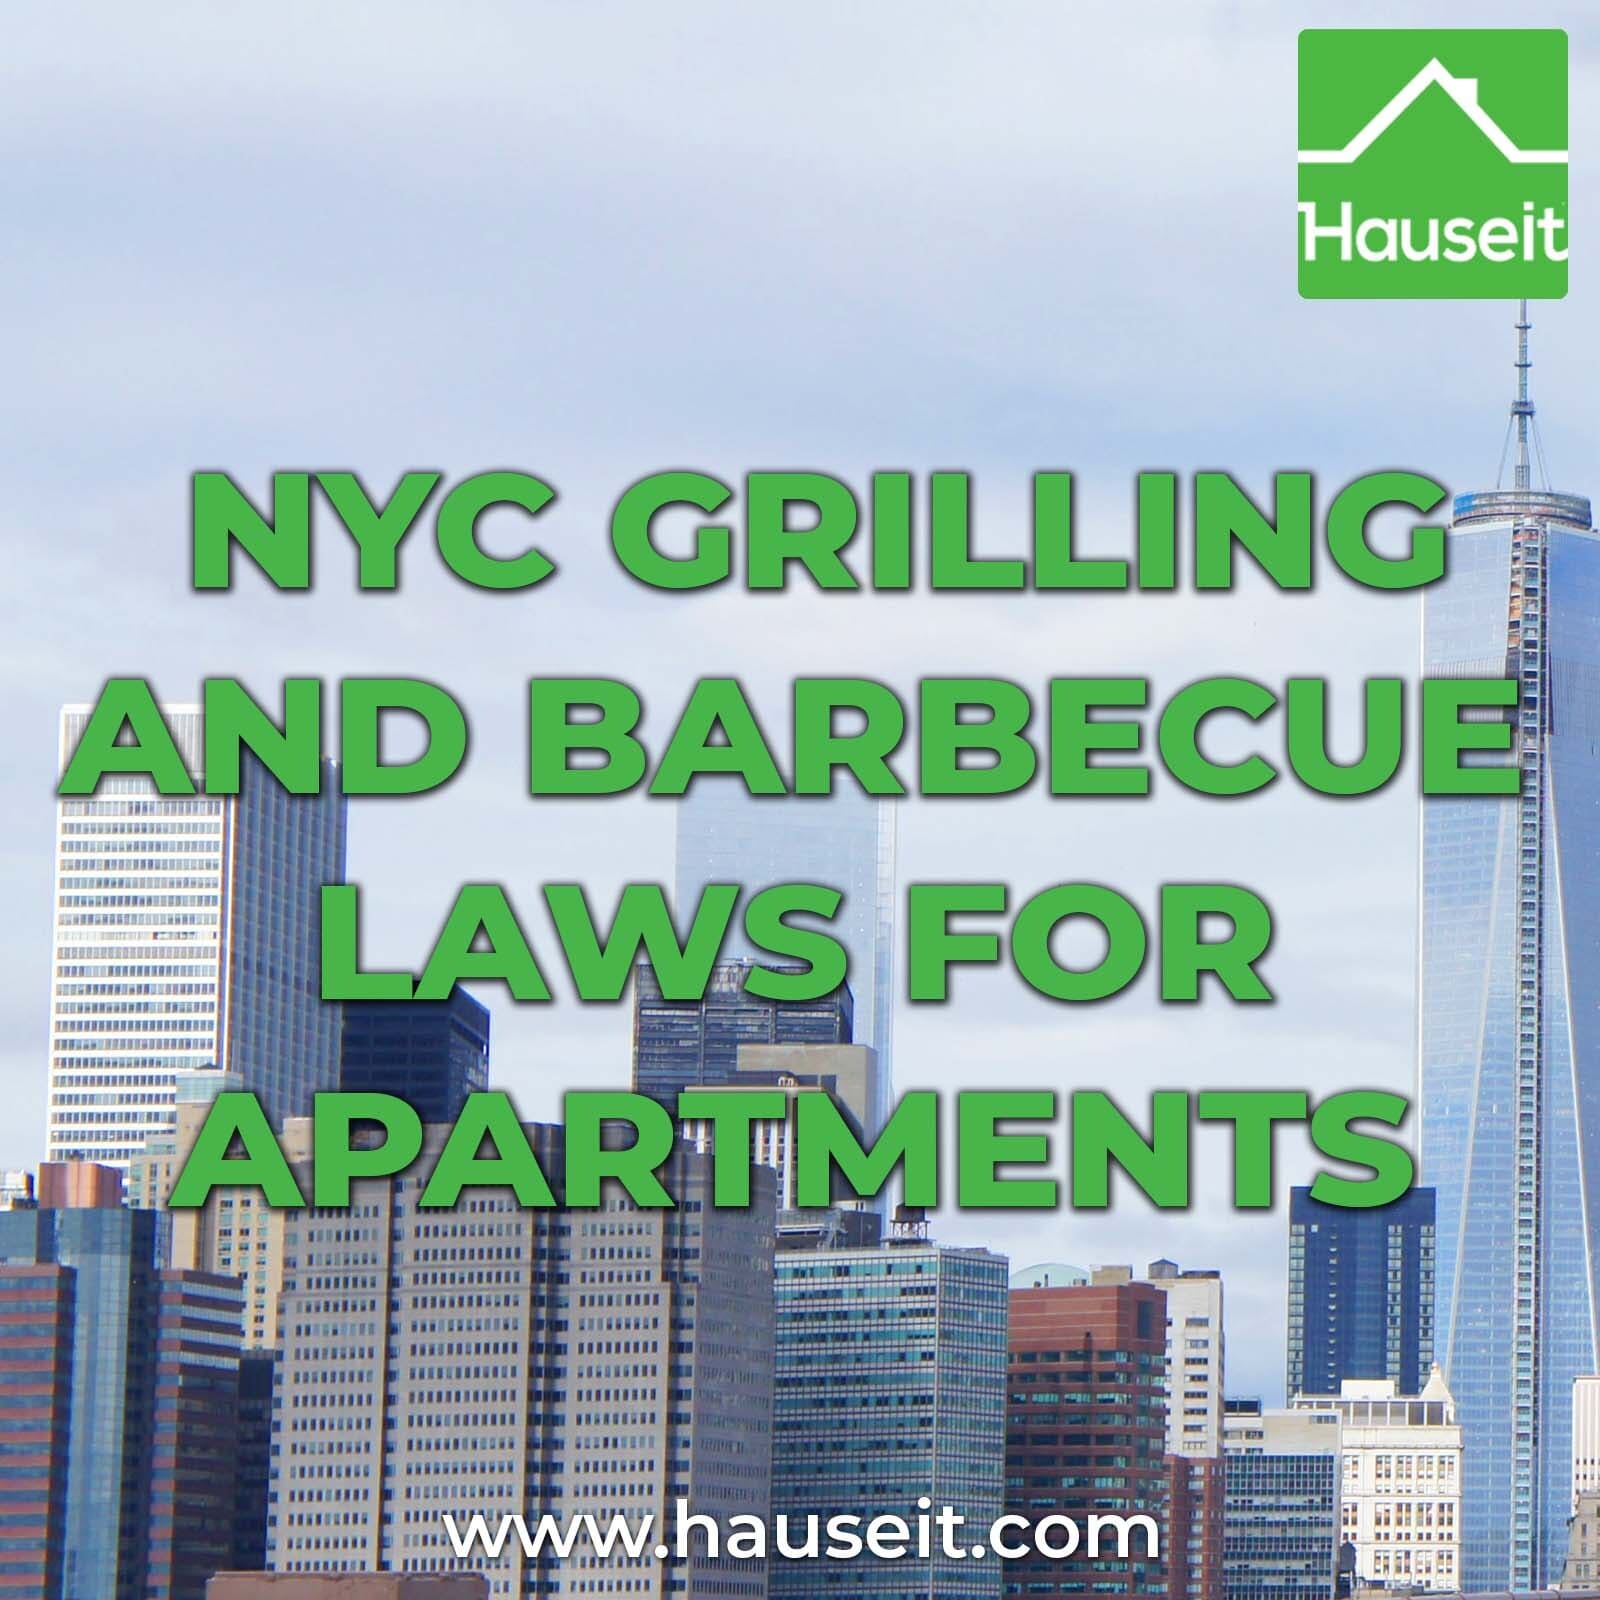 Nyc Grilling And Barbecue Laws For, Are Gas Fire Pits Legal In Nyc